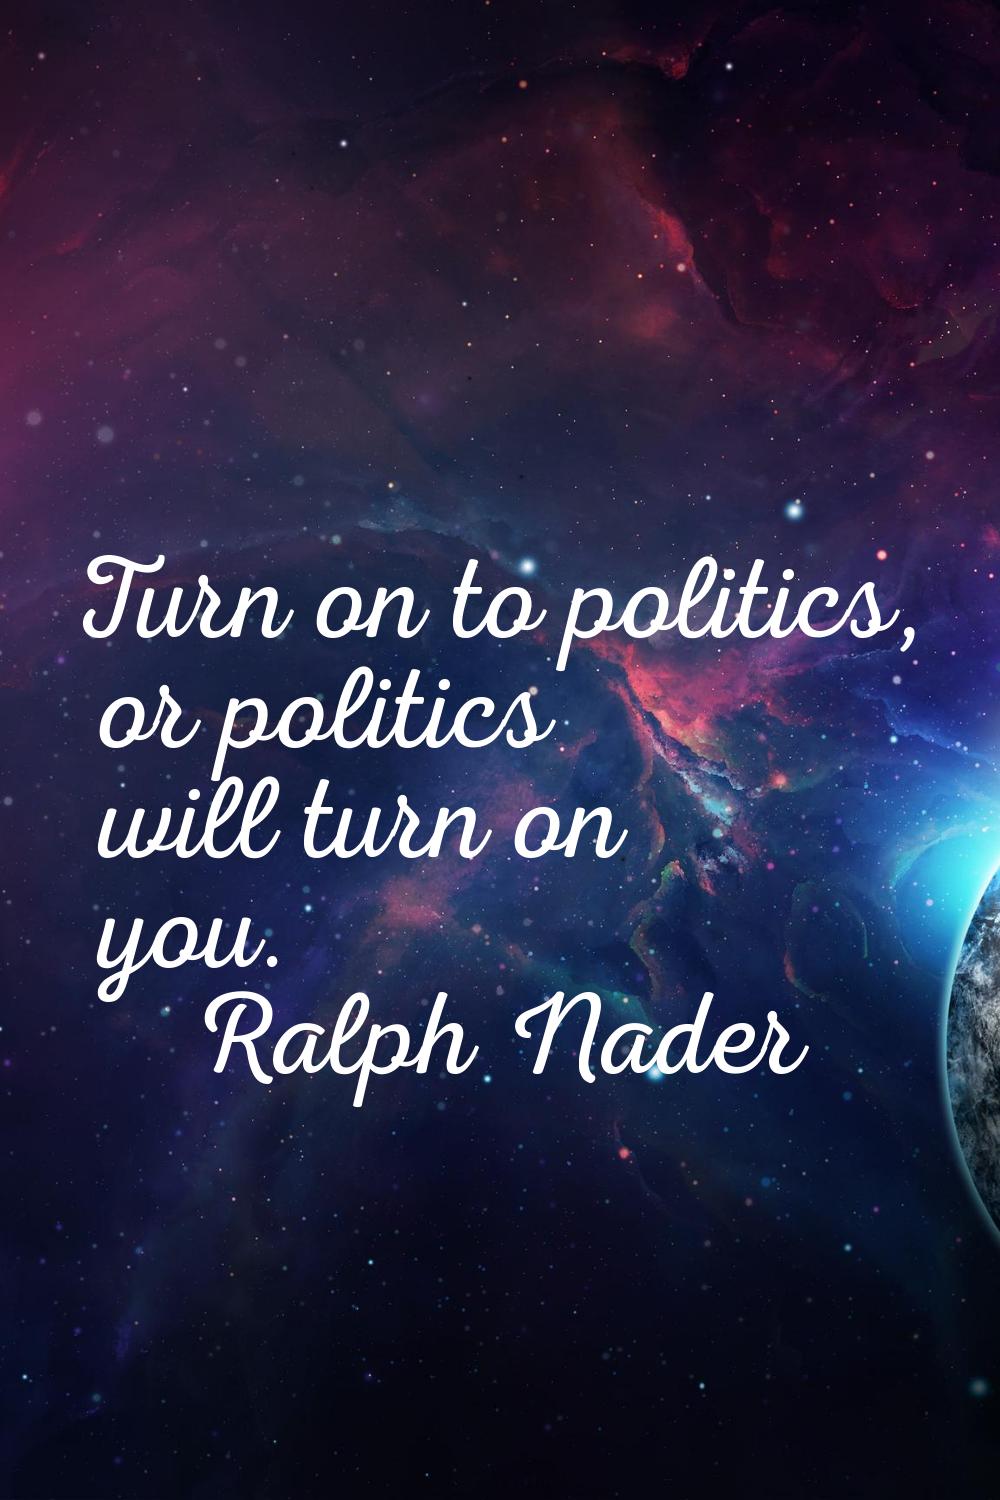 Turn on to politics, or politics will turn on you.